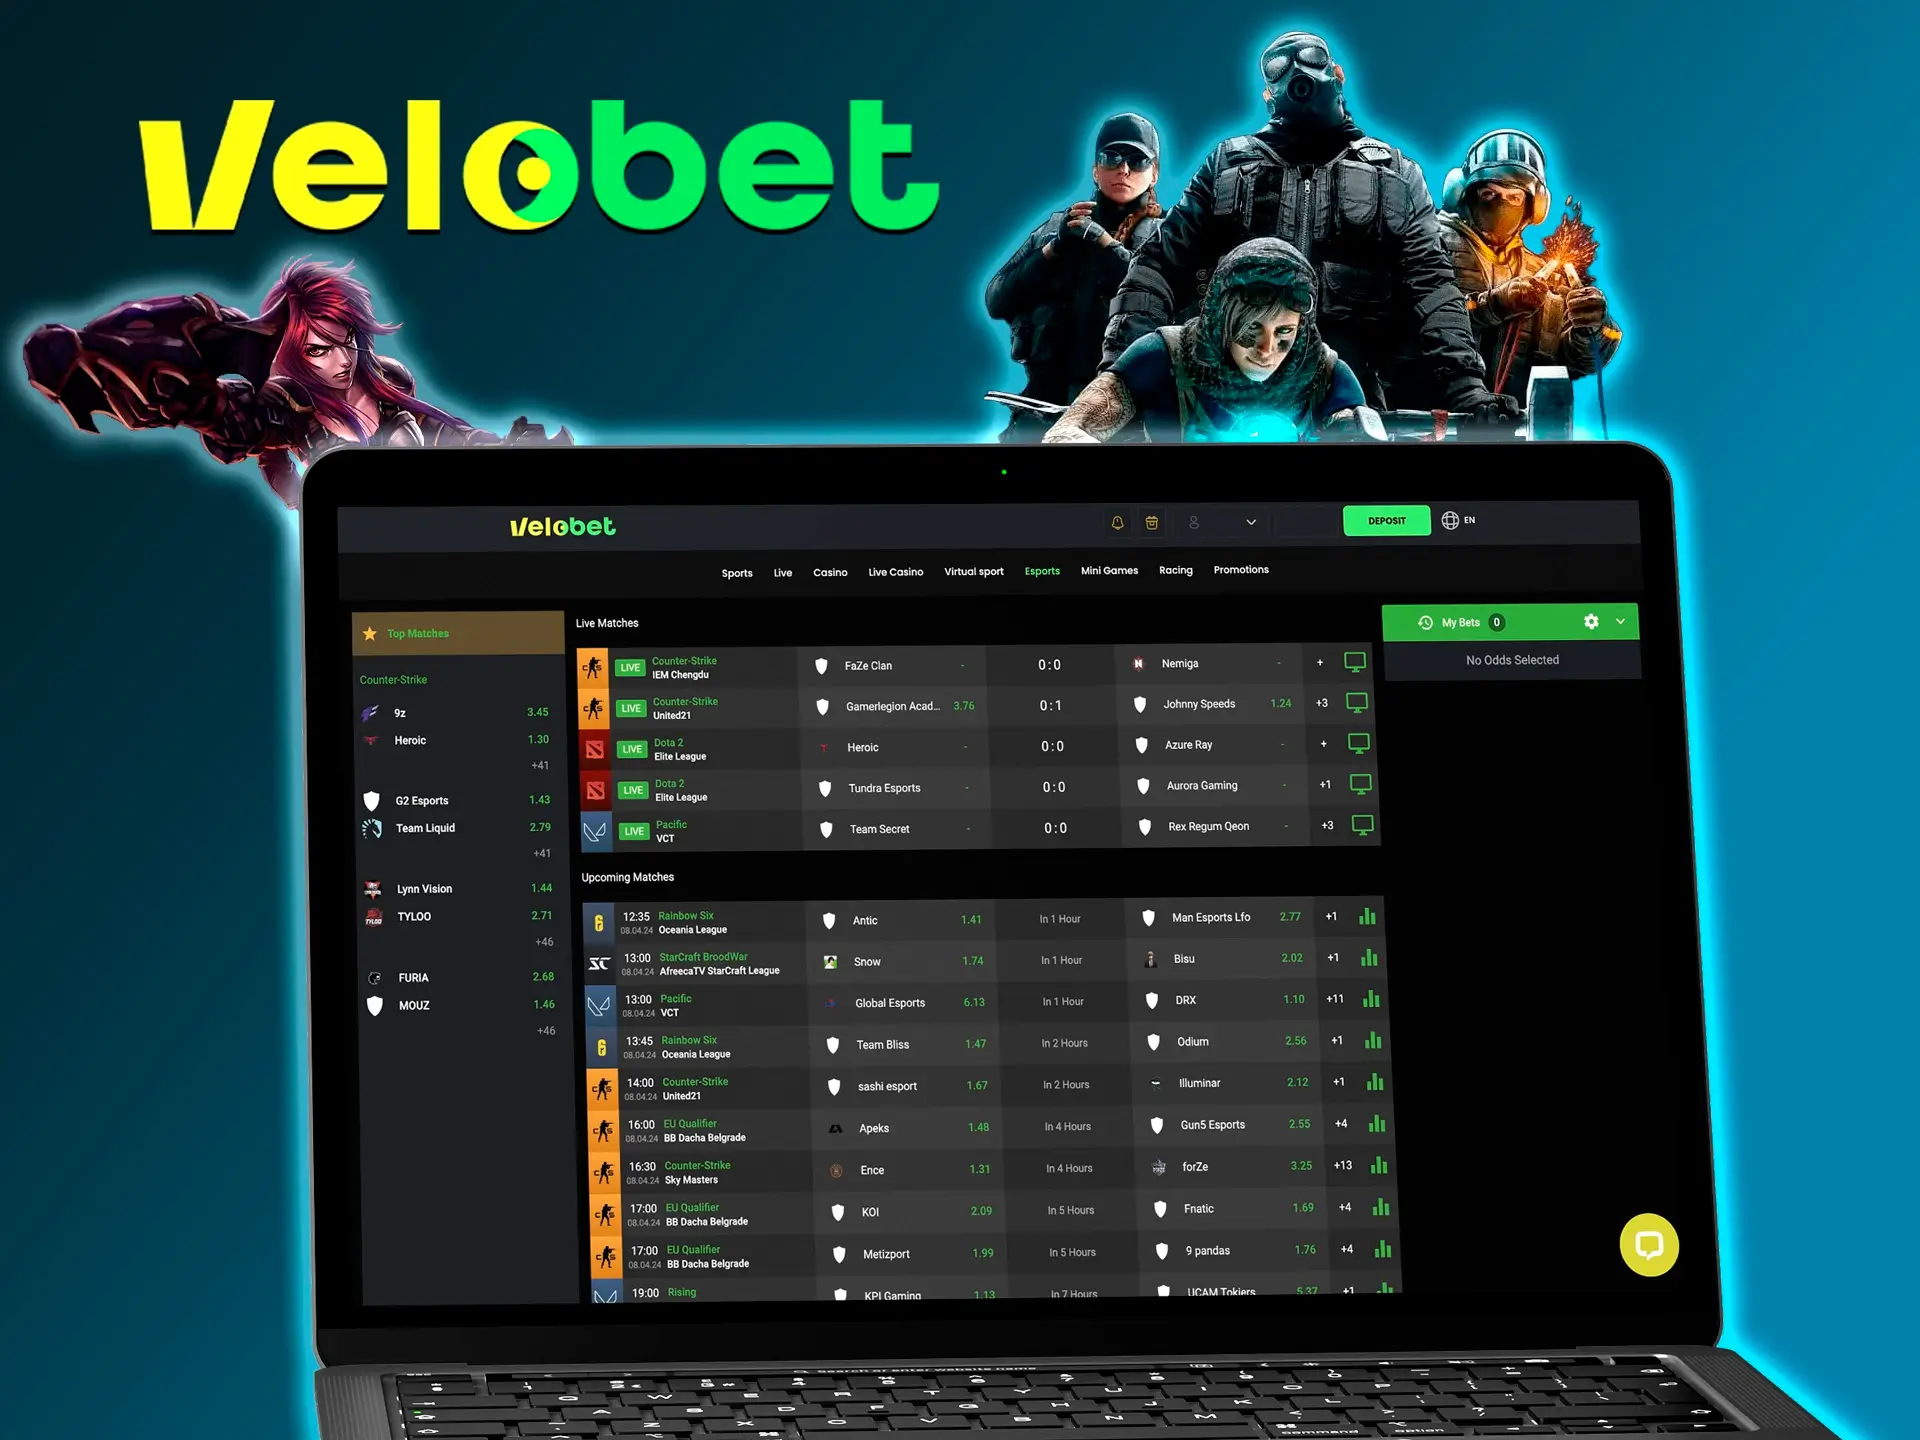 Velobet offers the highest odds for cyber sports.